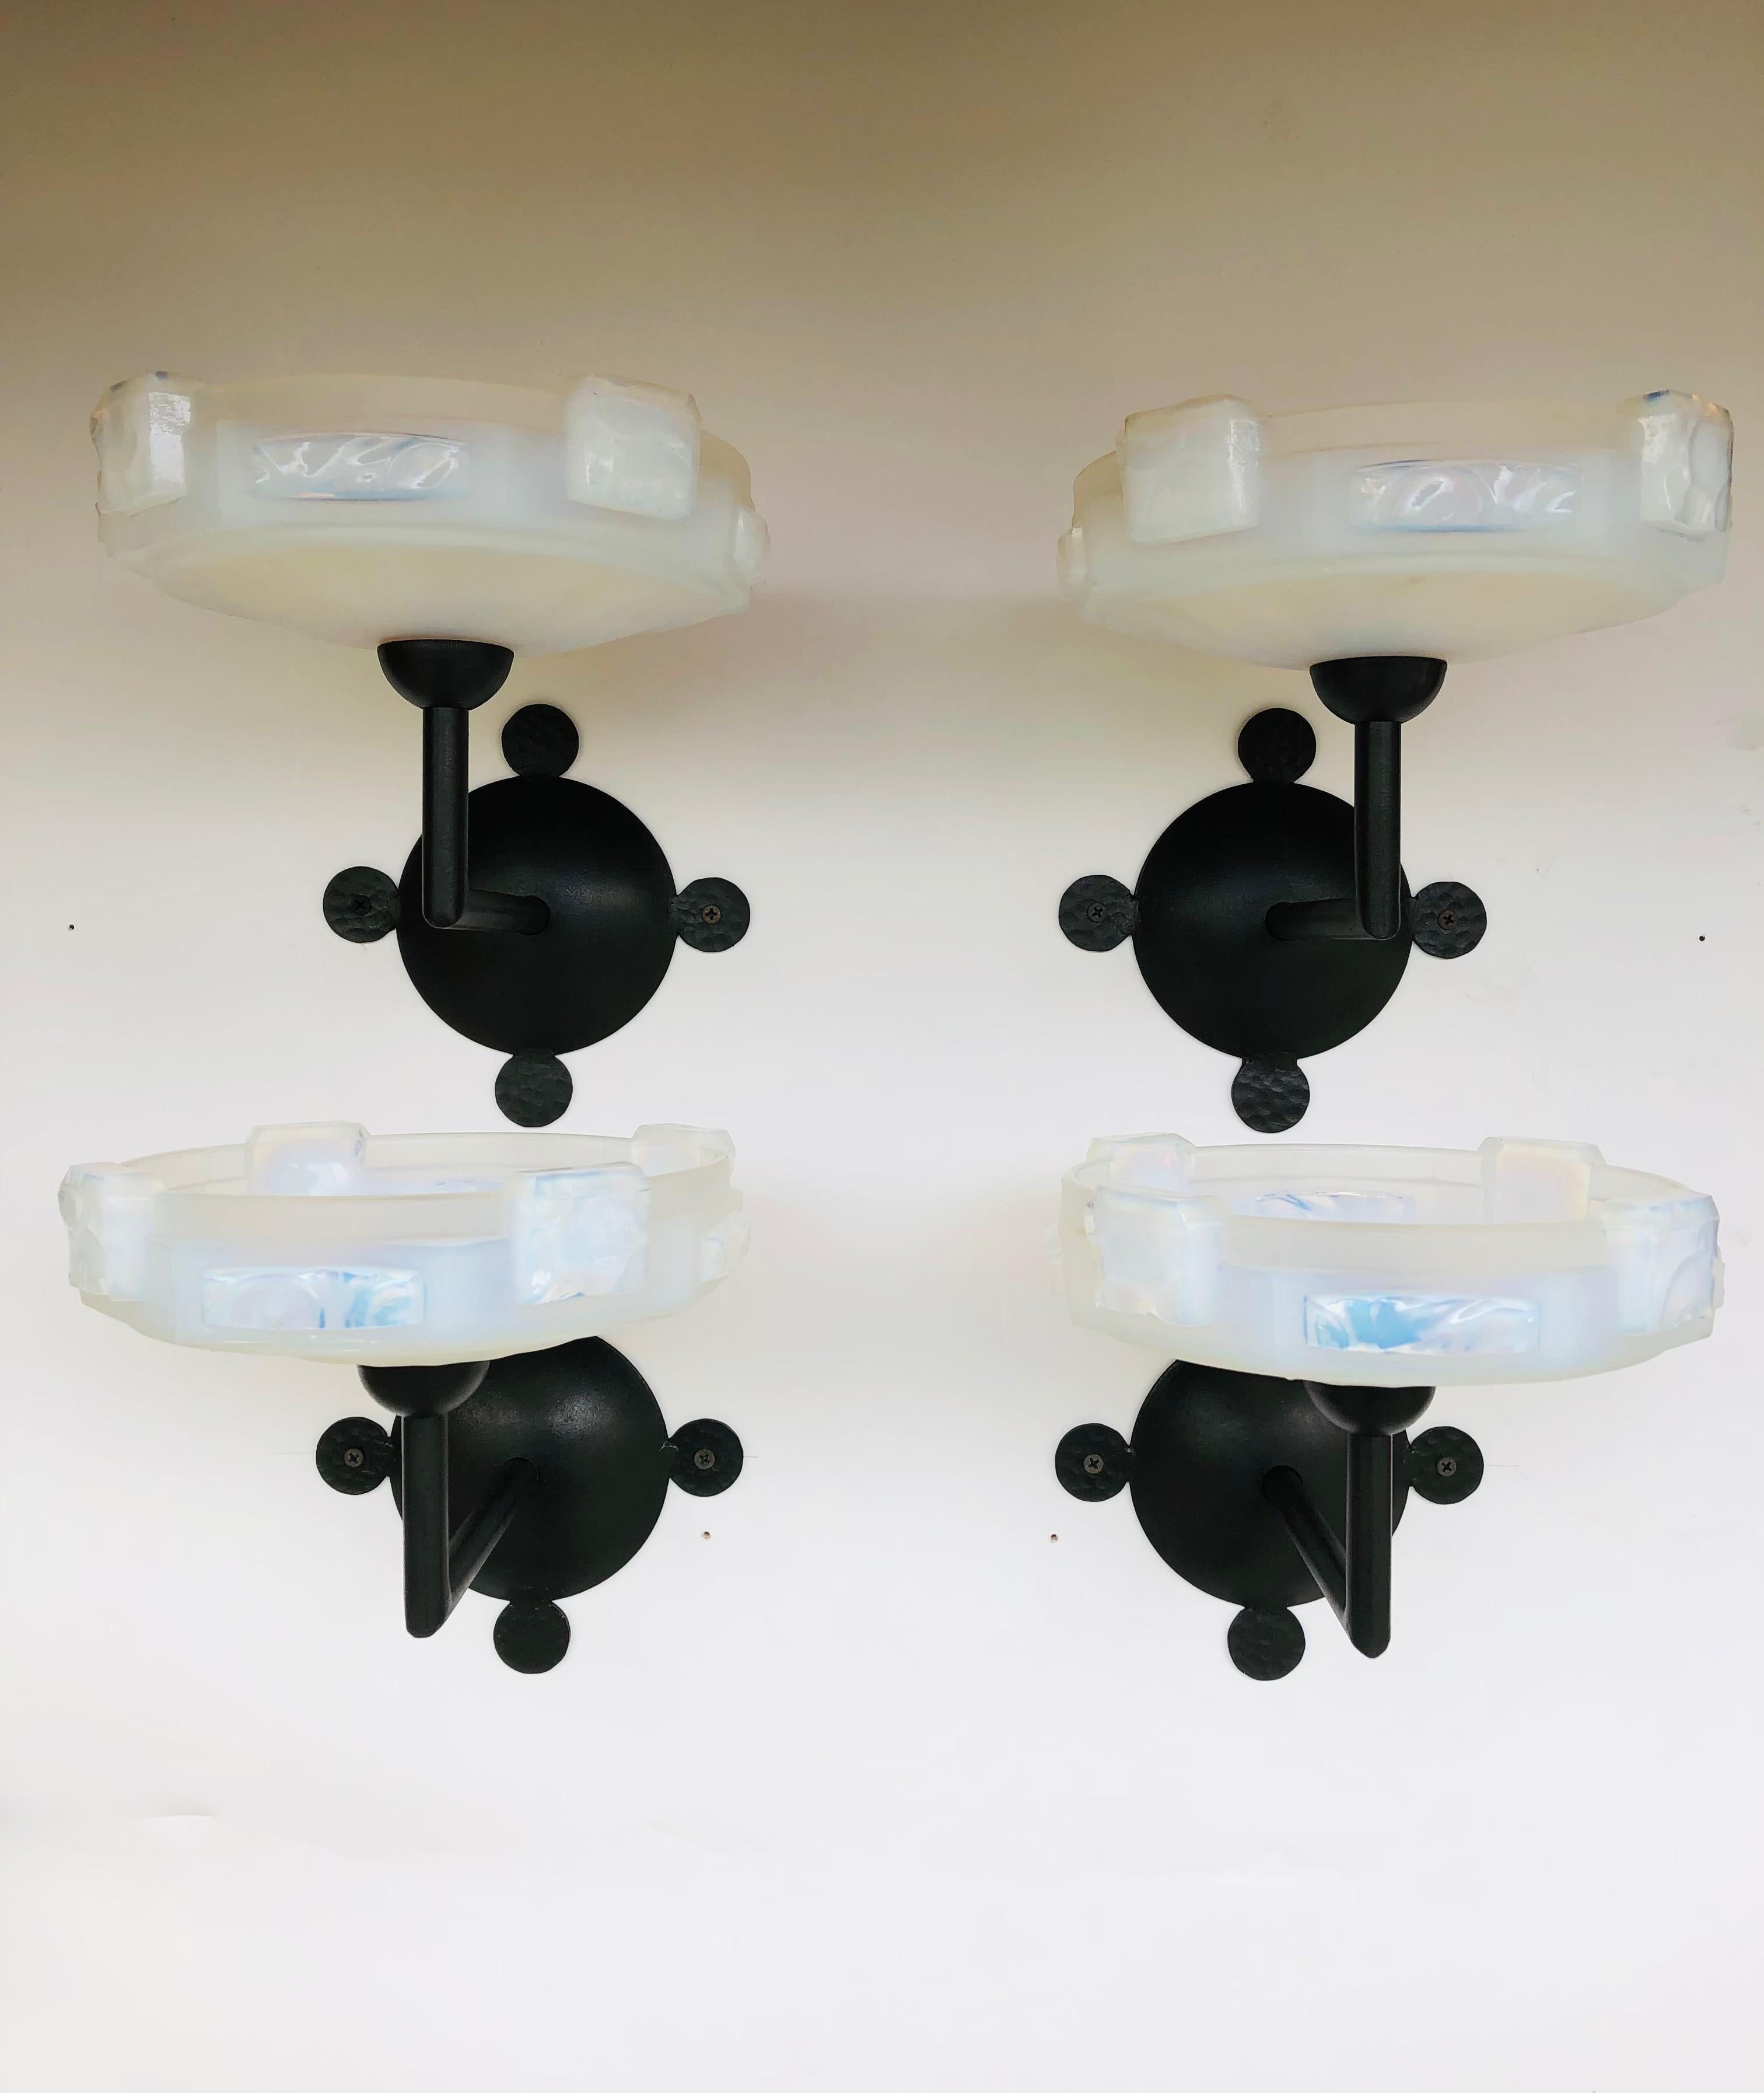 Suite of 4 sconces circa 1935 by Ezan in opalescent molded glass. Wrought iron frame. Electrified and in perfect condition.
Height: 23cm
Diameter: 21cm
Depth: 28cm
Width: 20 cm
Total weight: 7.2 Kg

Jean GAUTHIER Parisian decorator on glass